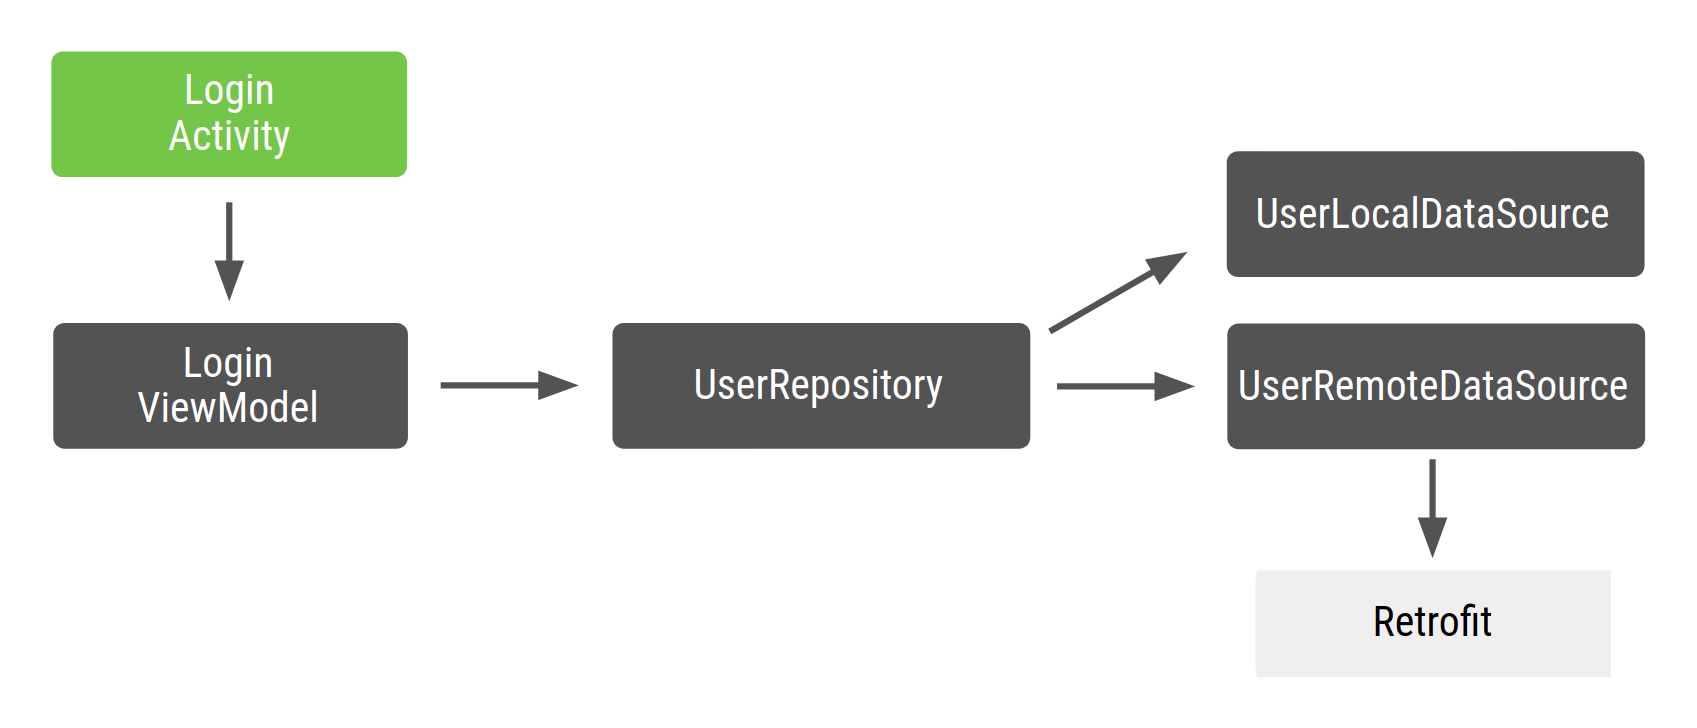 LoginActivity depends on LoginViewModel, which depends on UserRepository,
  which depends on UserLocalDataSource and UserRemoteDataSource, which in turn
  depends on Retrofit.